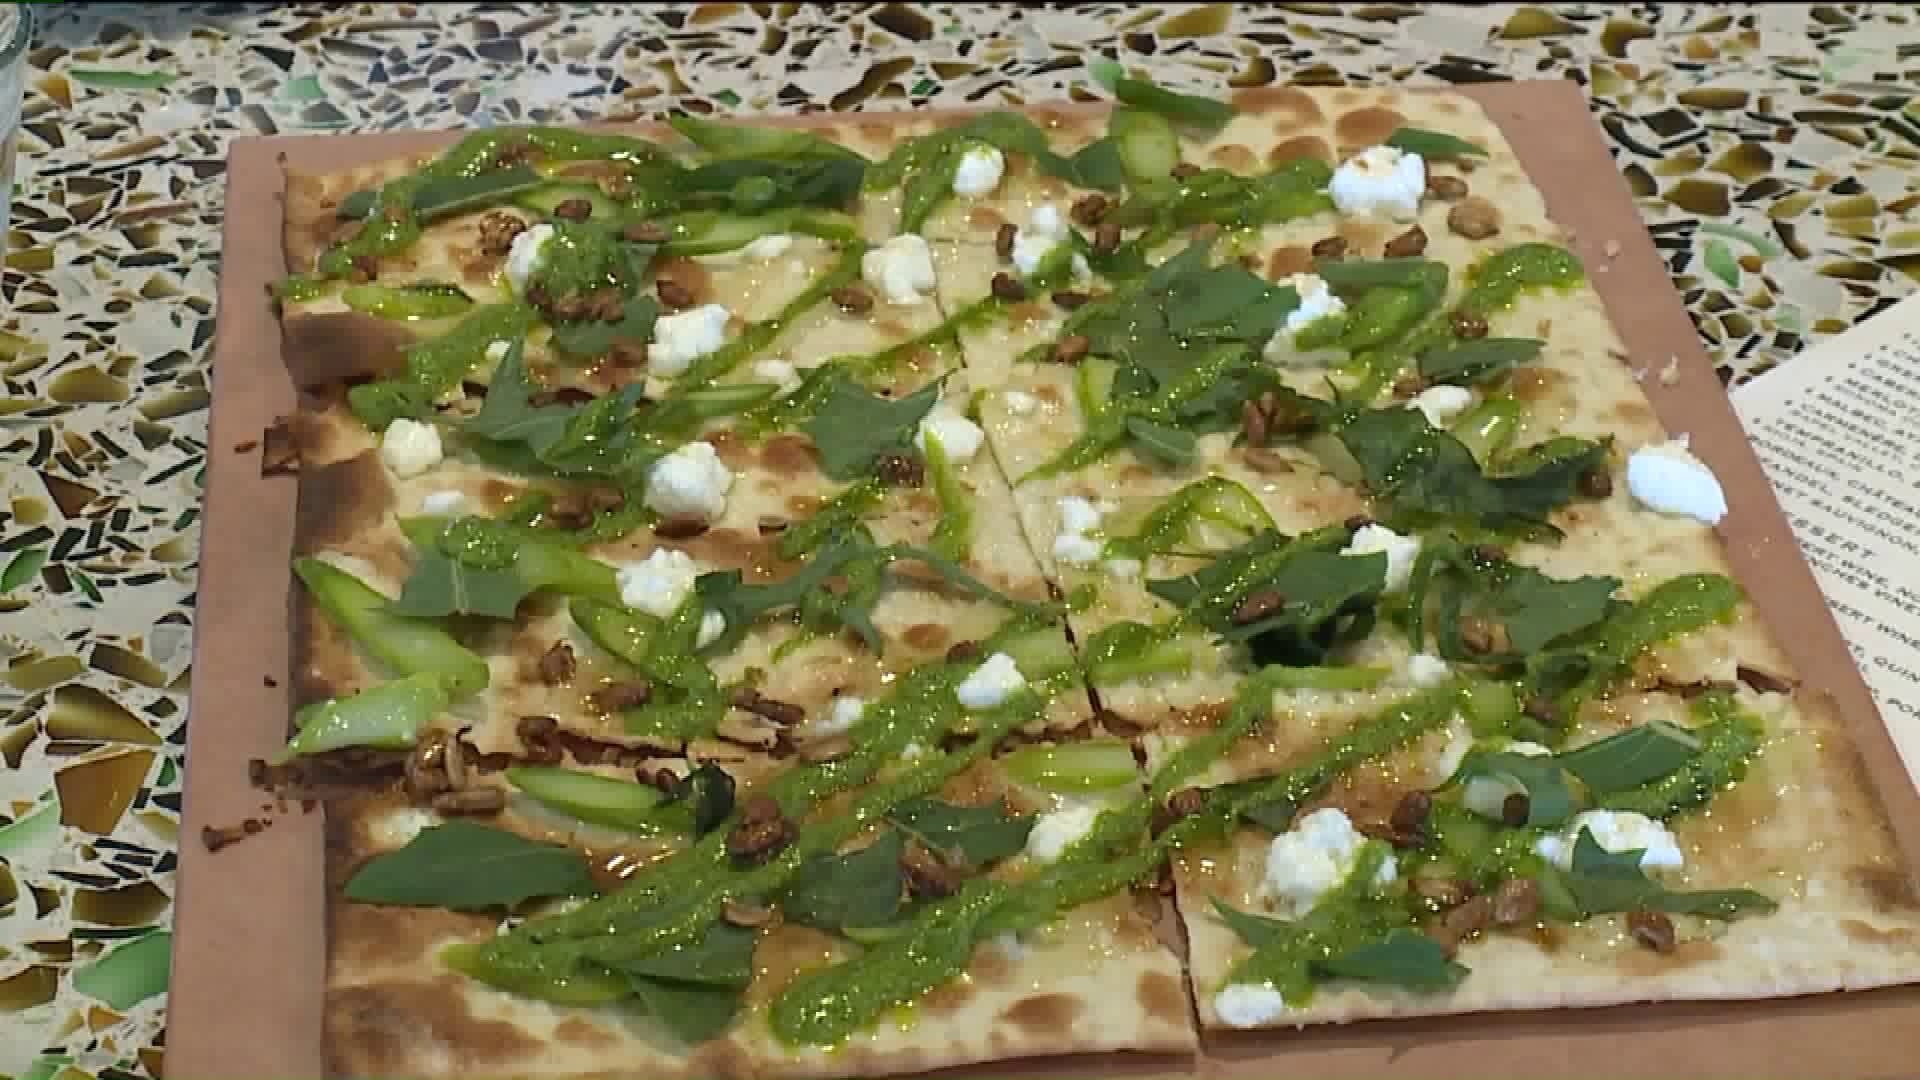 New Restaurant Focusing on Locally Grown Products